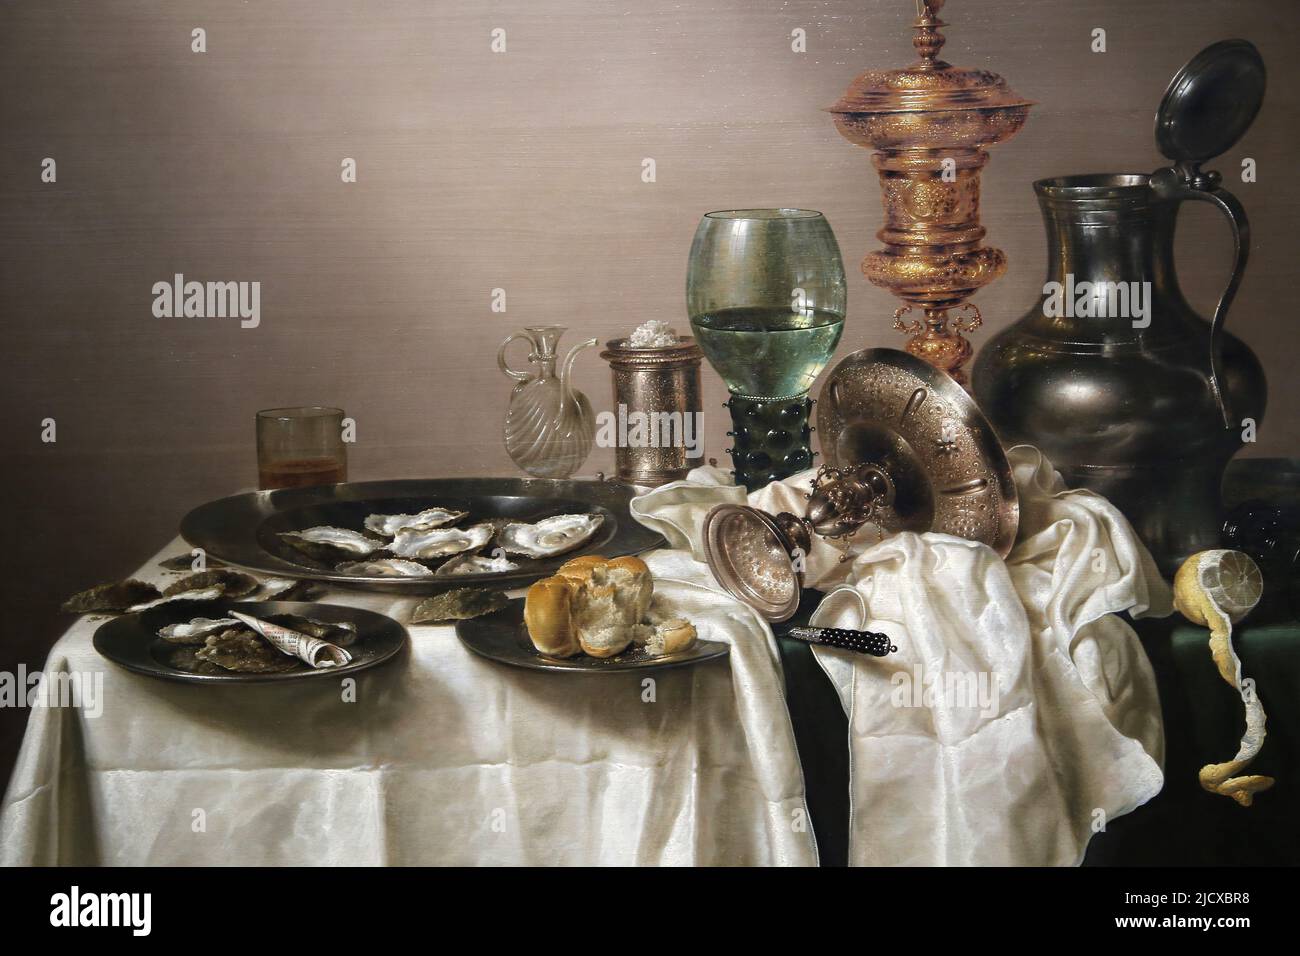 Still life with a gilt cup by Willem Claesz Heda (1594-1680). Oil on panel, 1635. Rijksmuseum. Amsterdam. Netherlands. Stock Photo